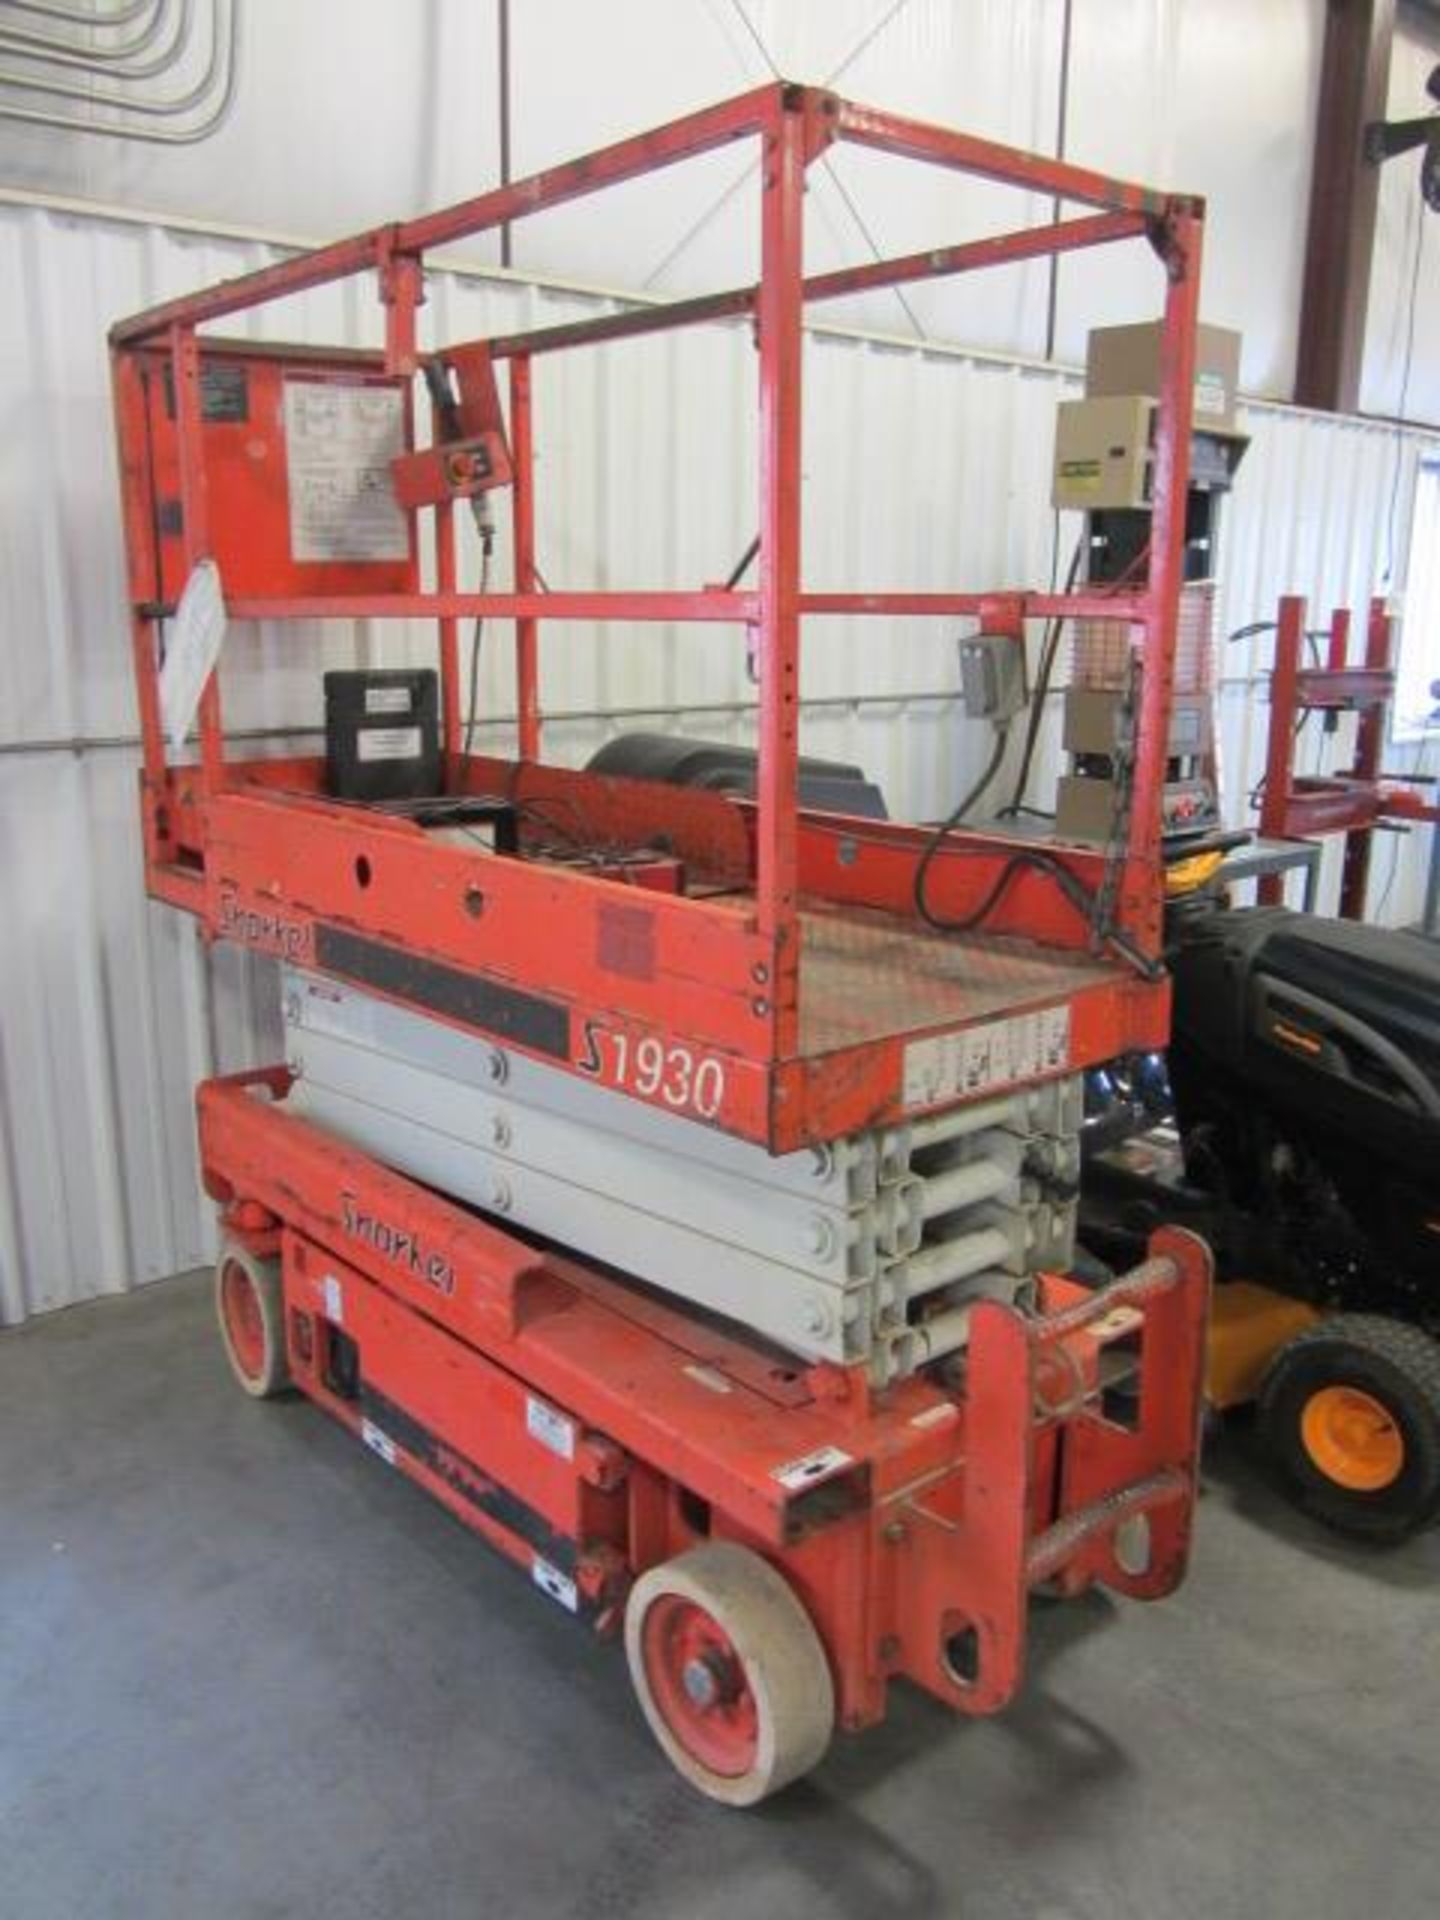 Snorkel S1930 Portable Electric Scissor Manlift with 24'' x 70'' Deck, 500lb Capacity, Lifts to